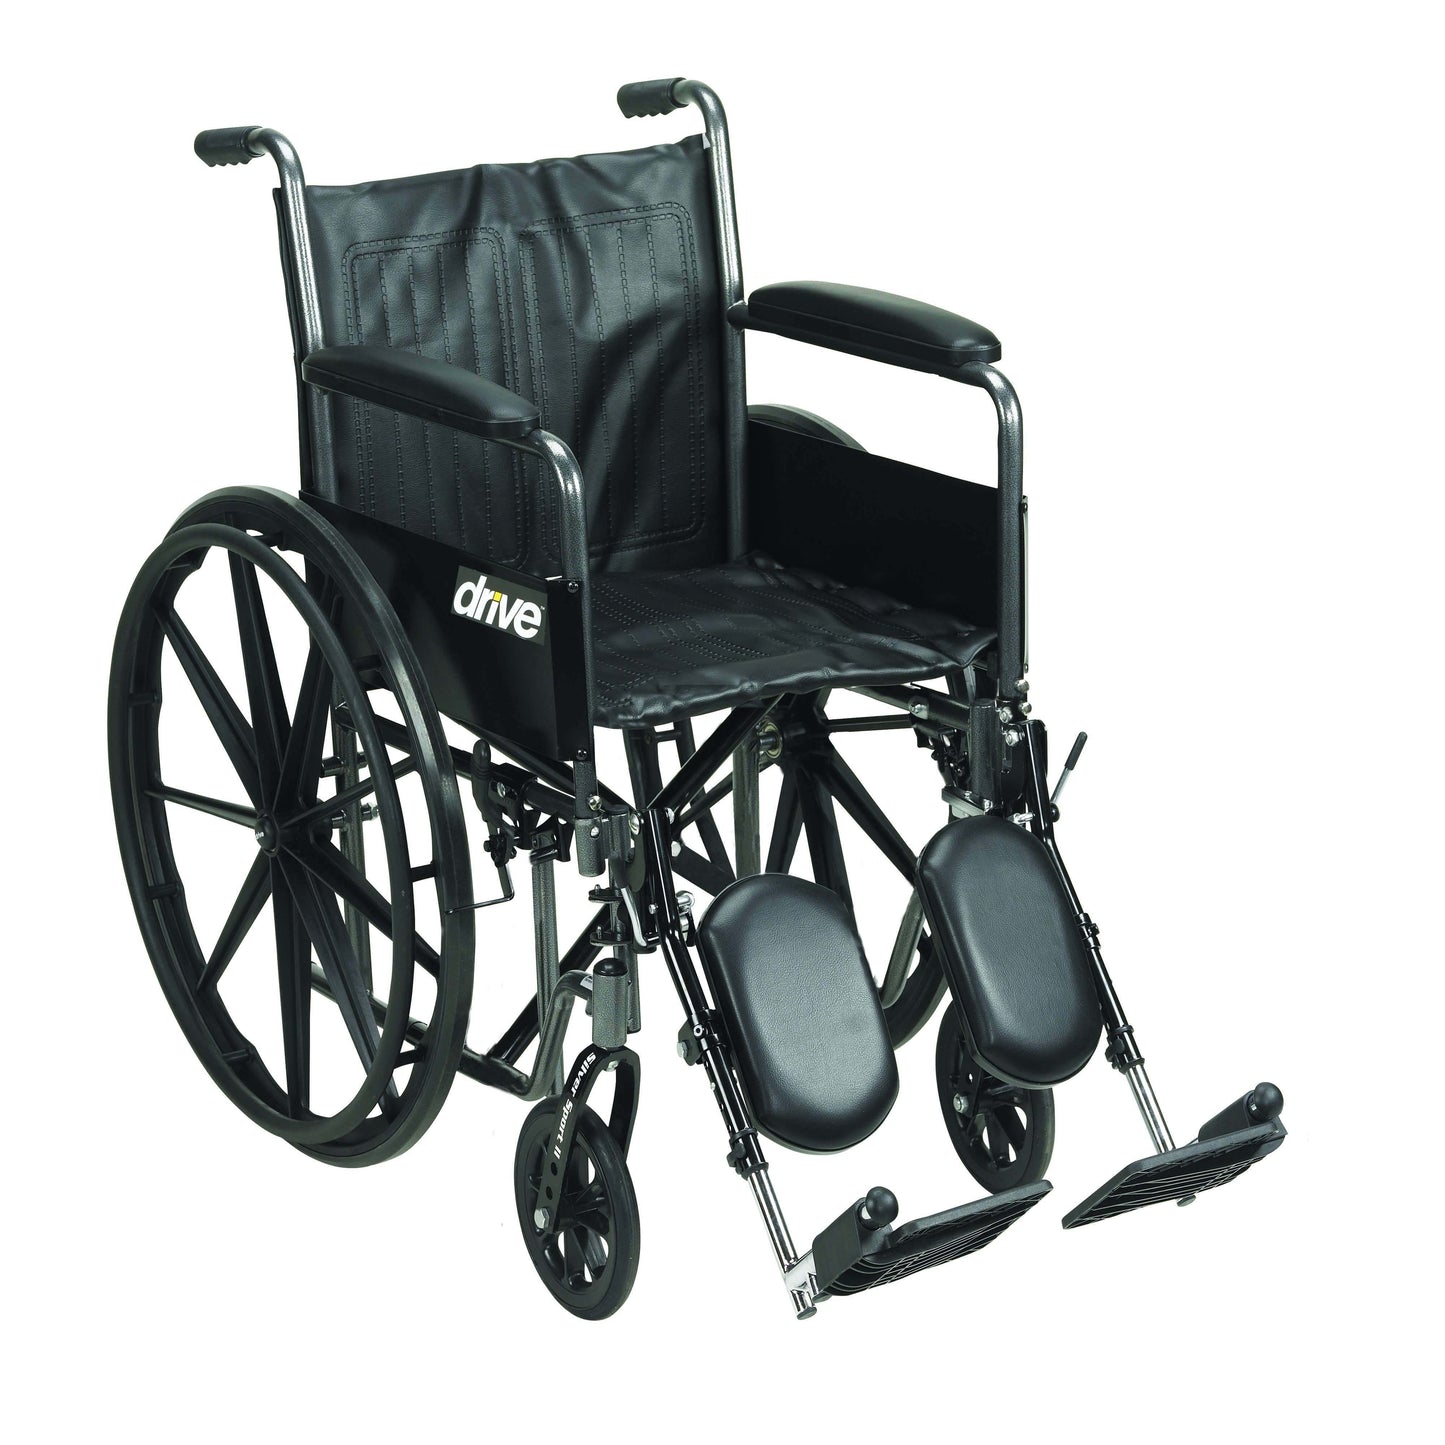 Drive ssp216dfa-elr Silver Sport 2 Wheelchair, Detachable Full Arms, Elevating Leg Rests, 16" Seat